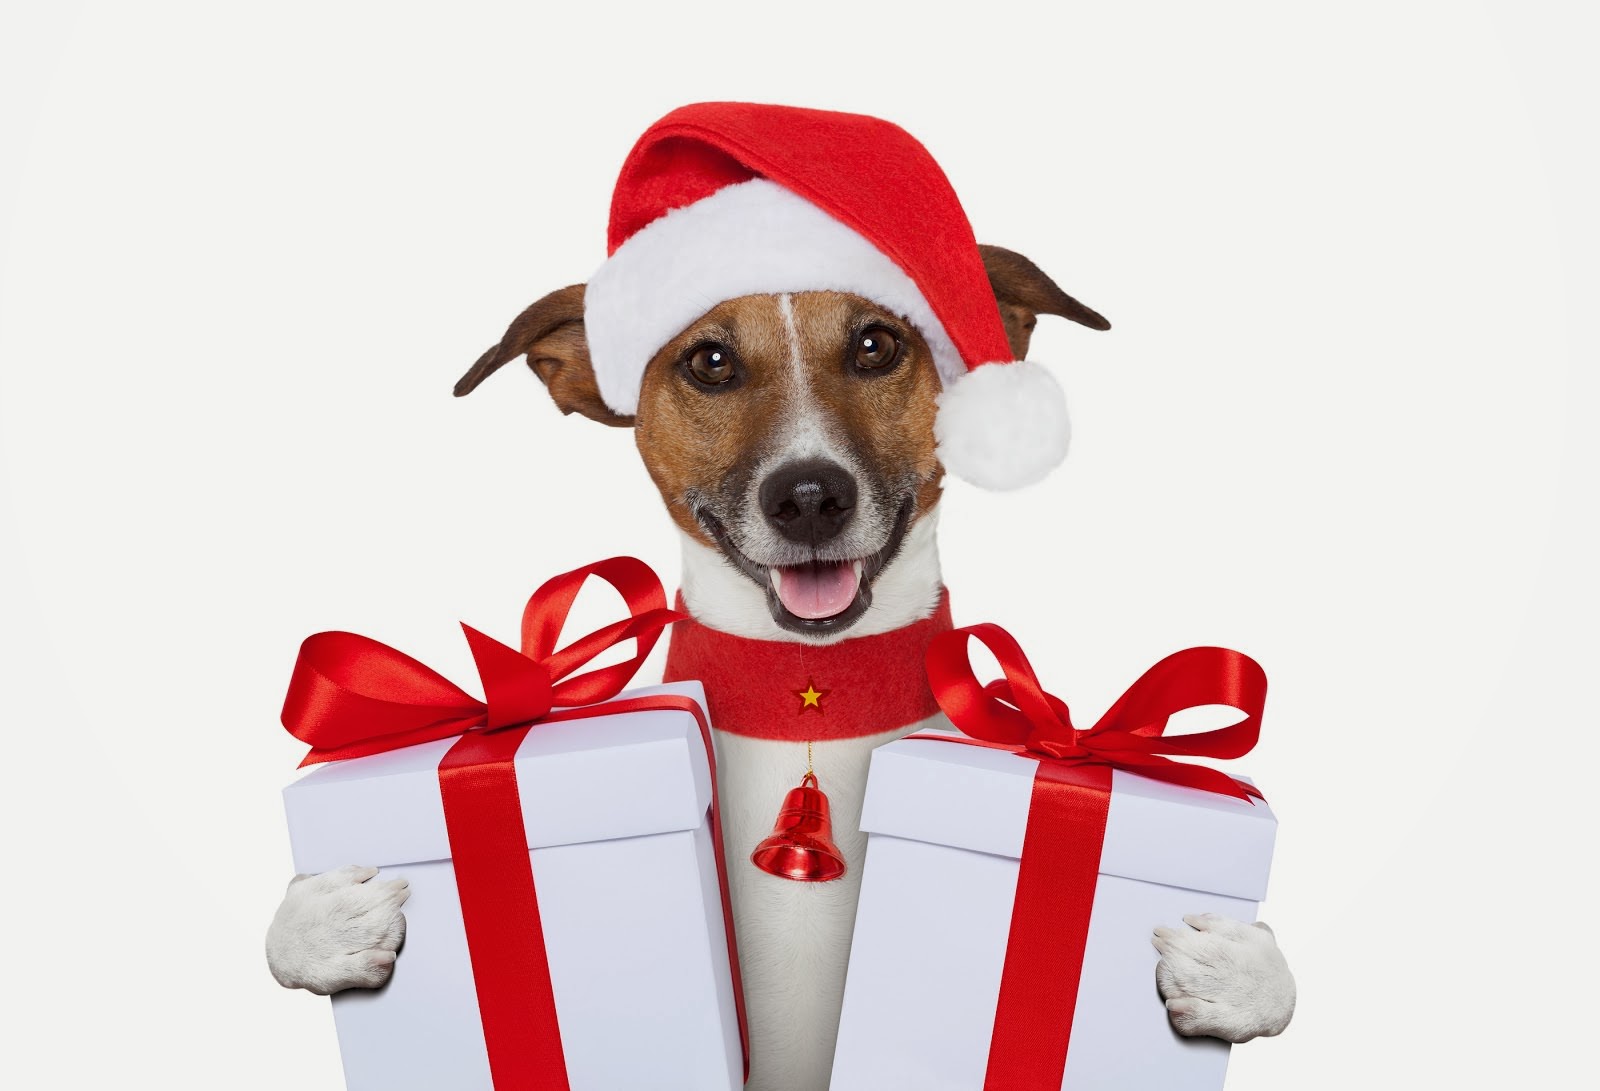 10 Pets Dressed Festively Are Sure to Steal The Show This Christmas